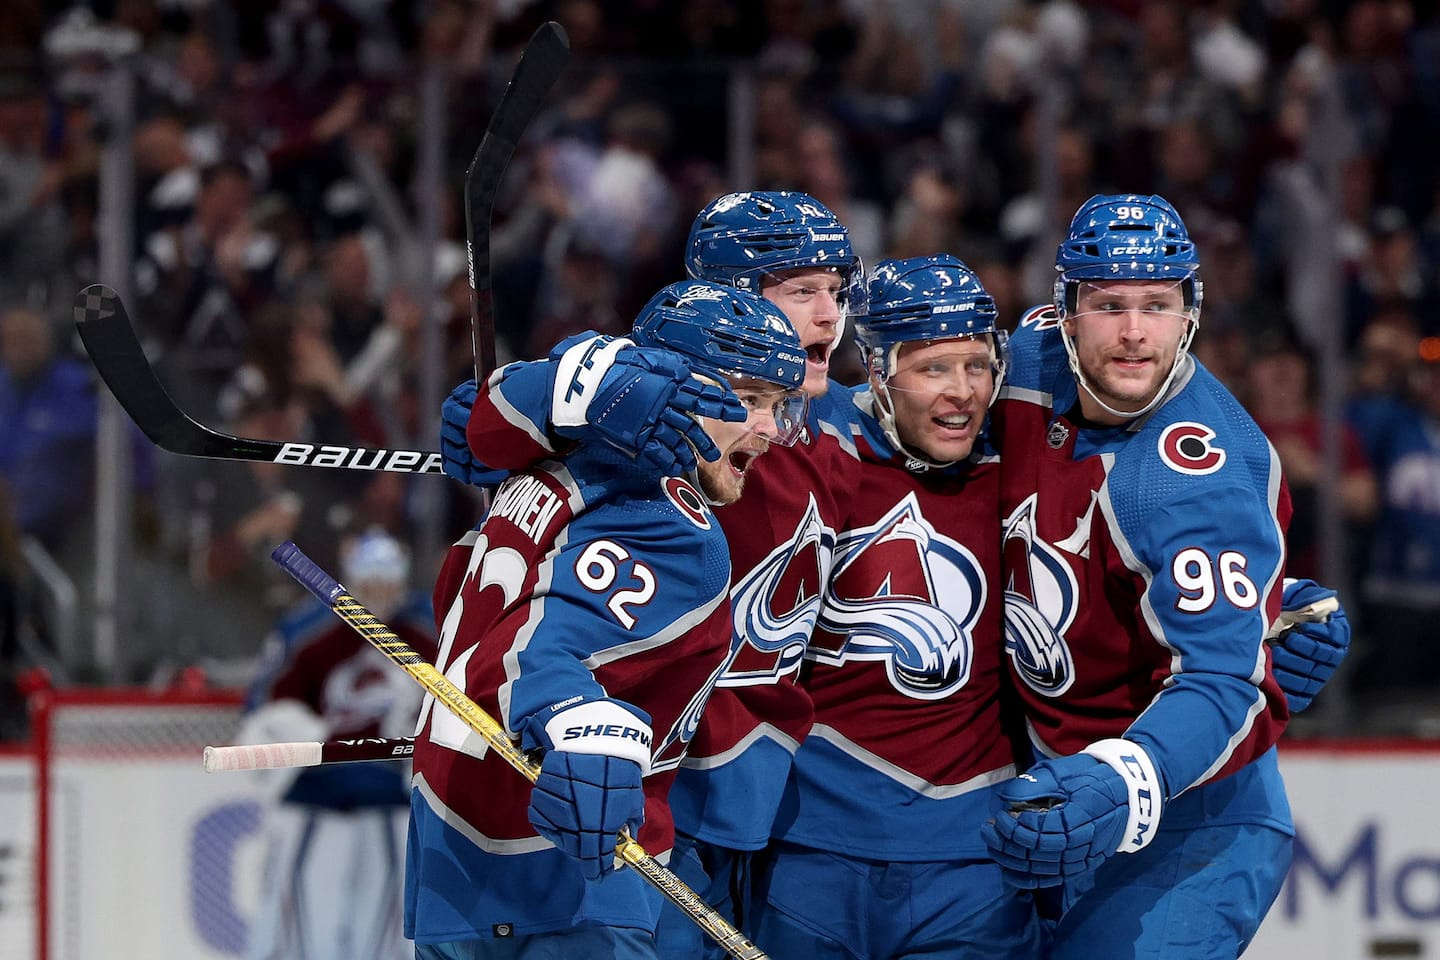 The Avalanche calm the game and triumph